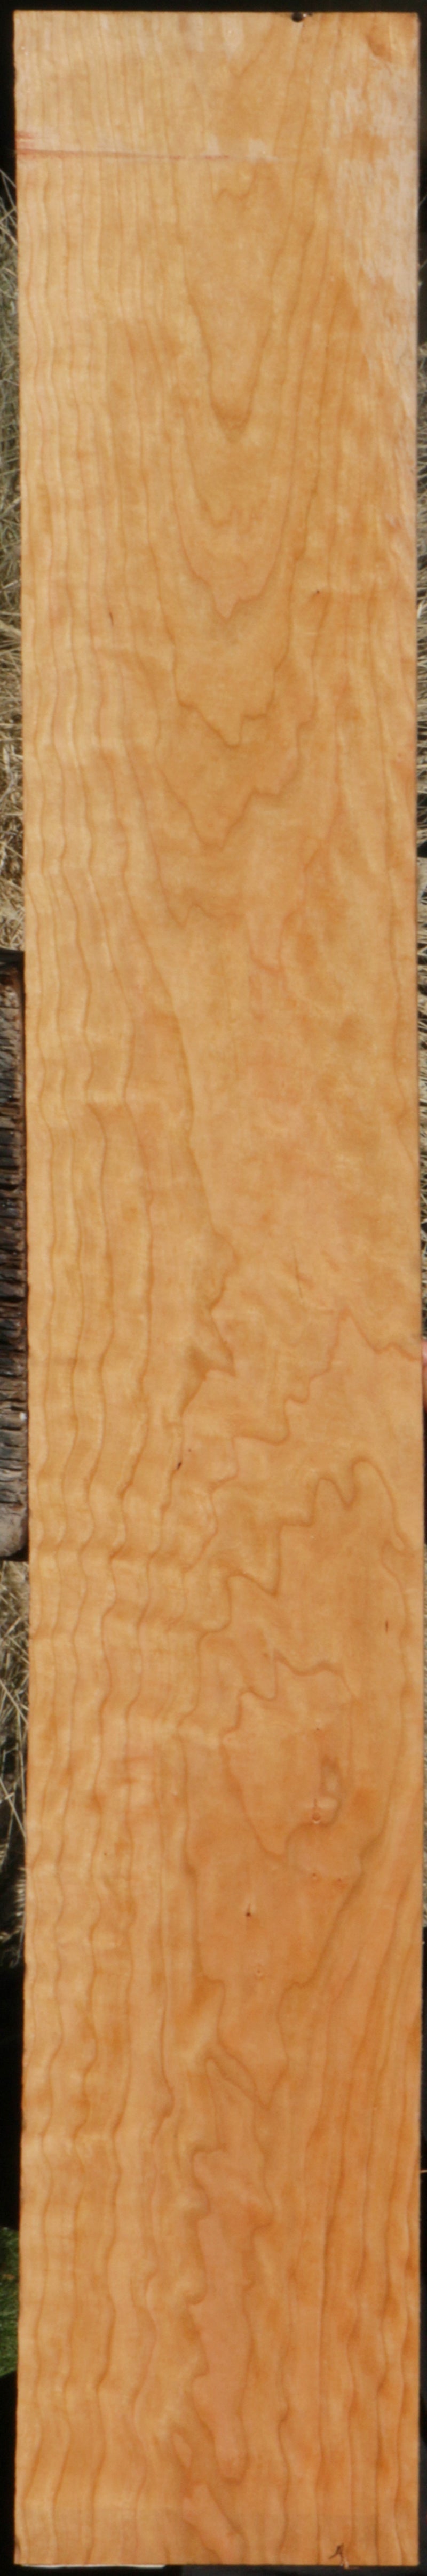 Extra Fancy Curly Cherry Lumber